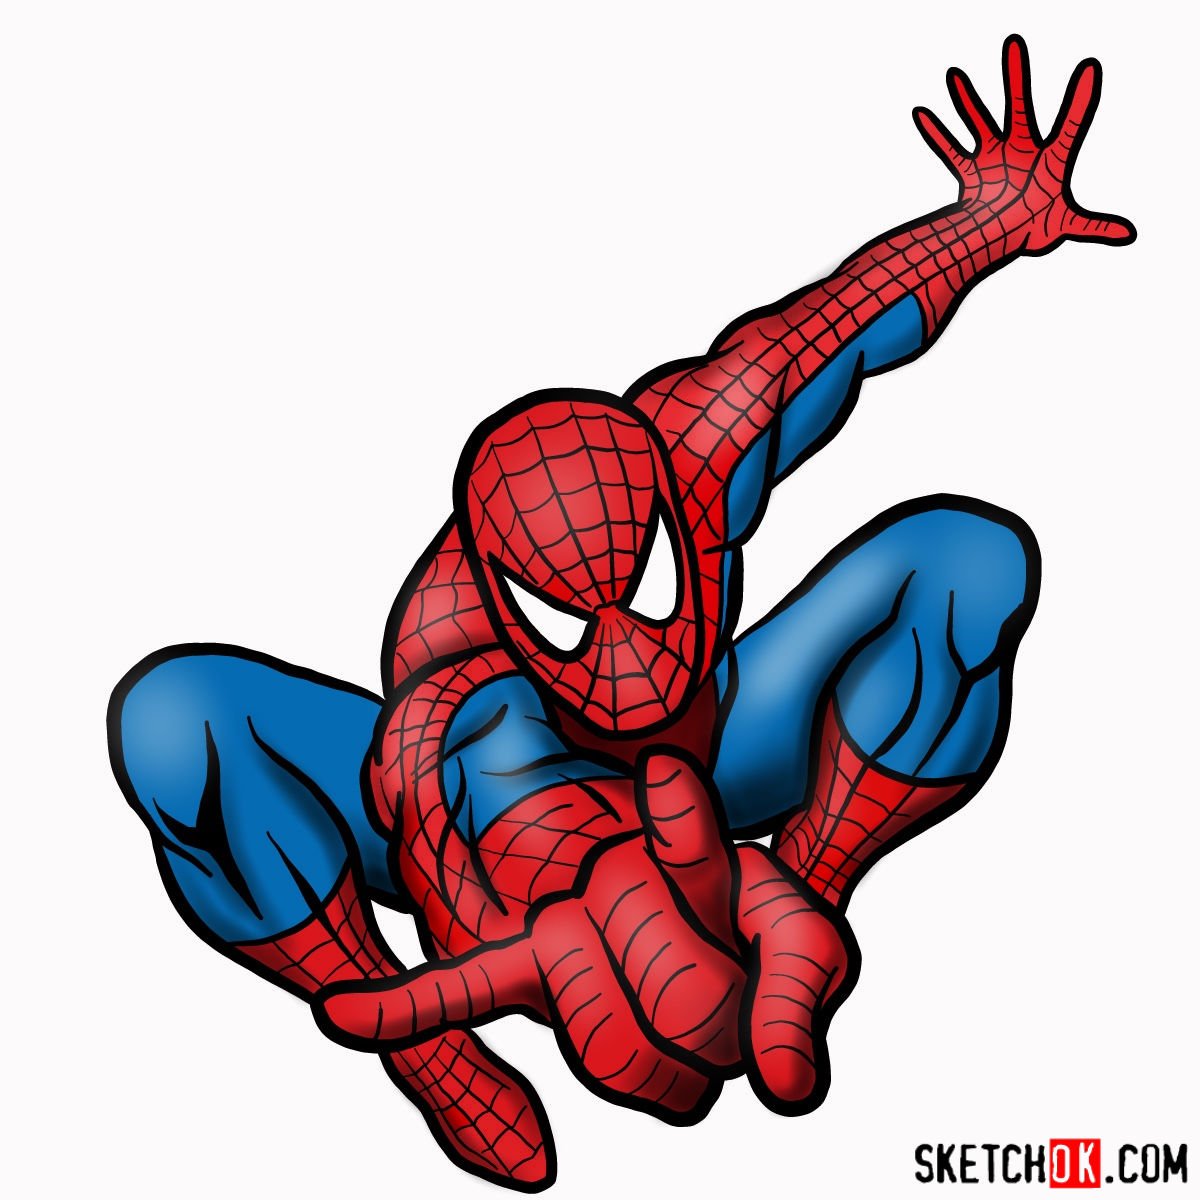 Mini Spider-Man Drawing | Easy drawings, Spiderman drawing, Spider drawing